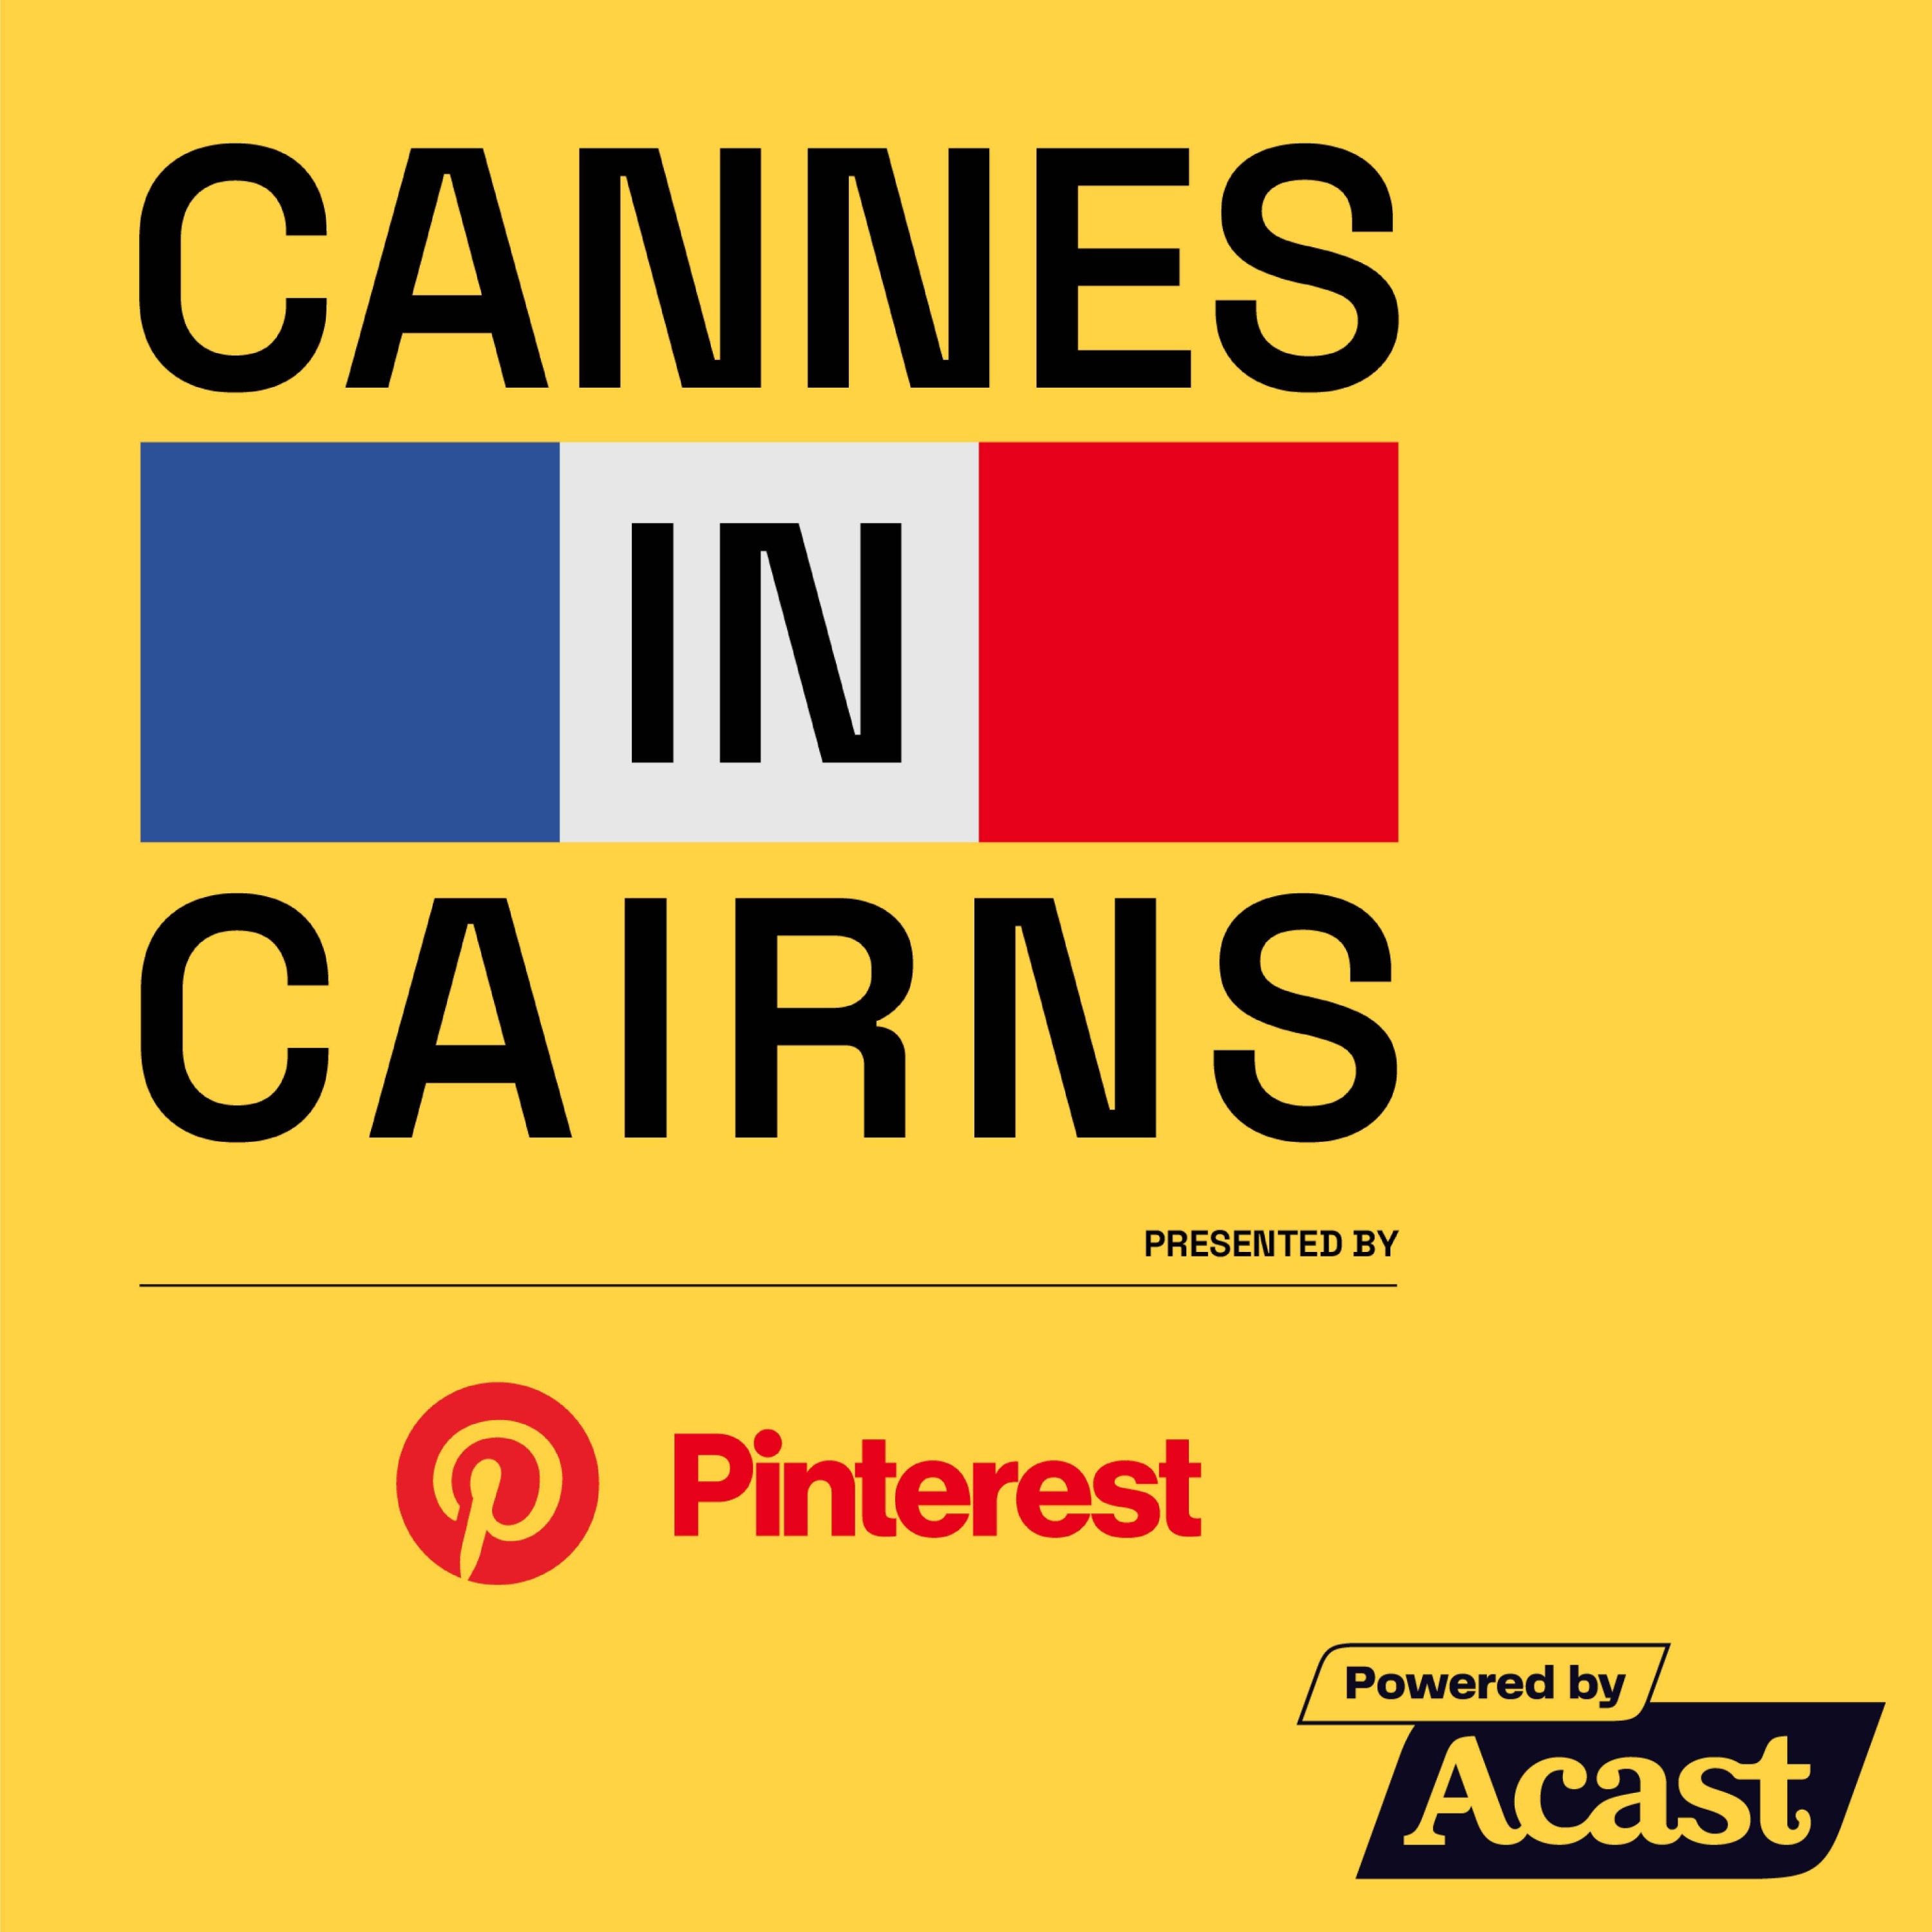 Vanessa Jones On What Inspired Pinterest To Get Behind This Inaugural Idea Of Cannes In Cairns